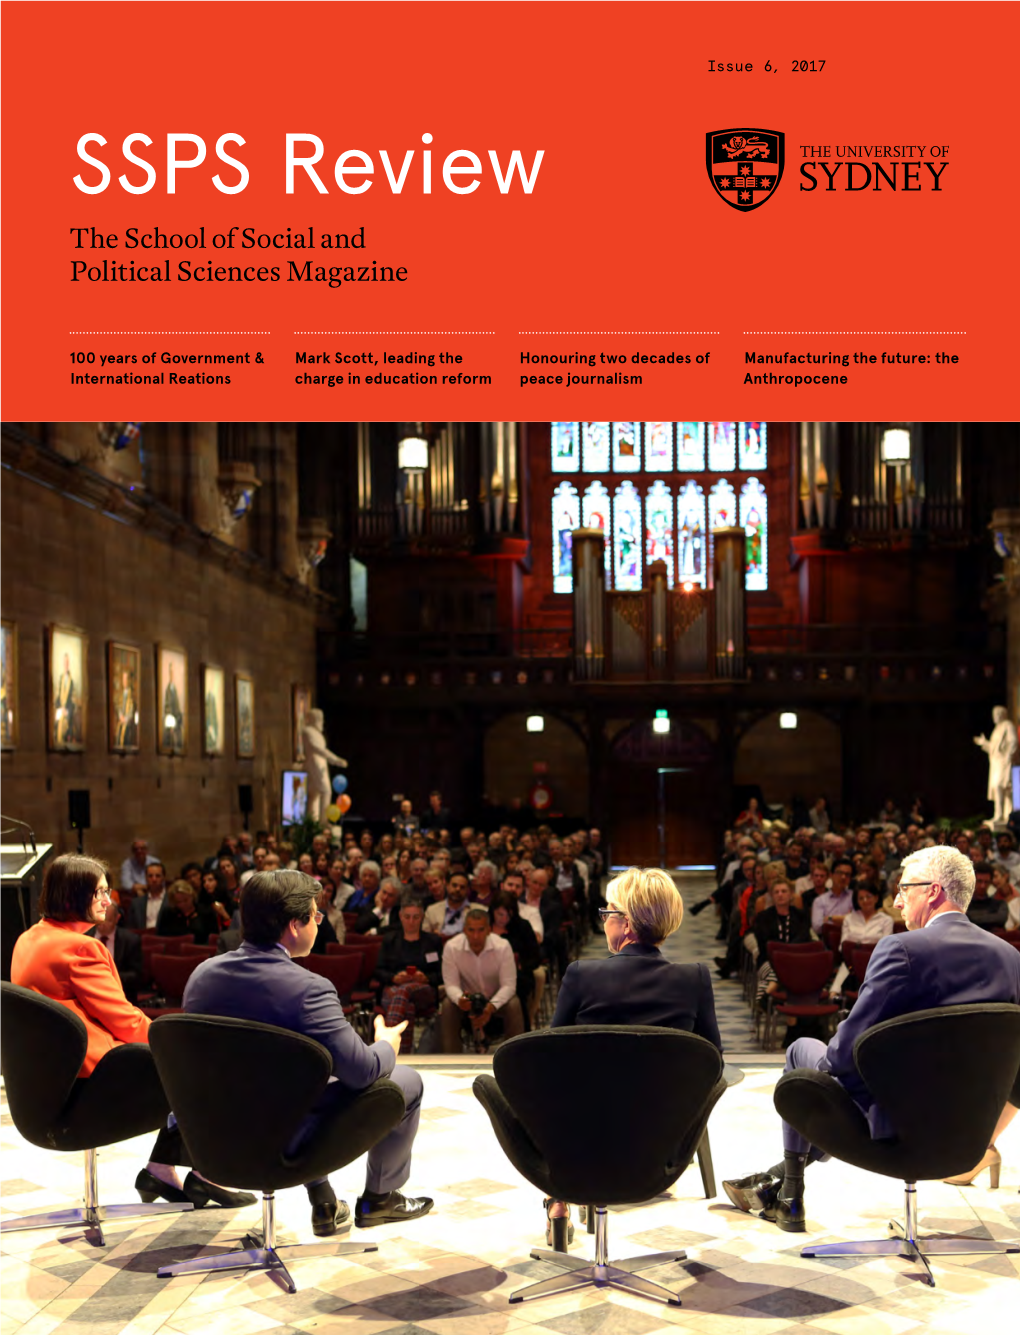 SSPS Review the School of Social and Political Sciences Magazine